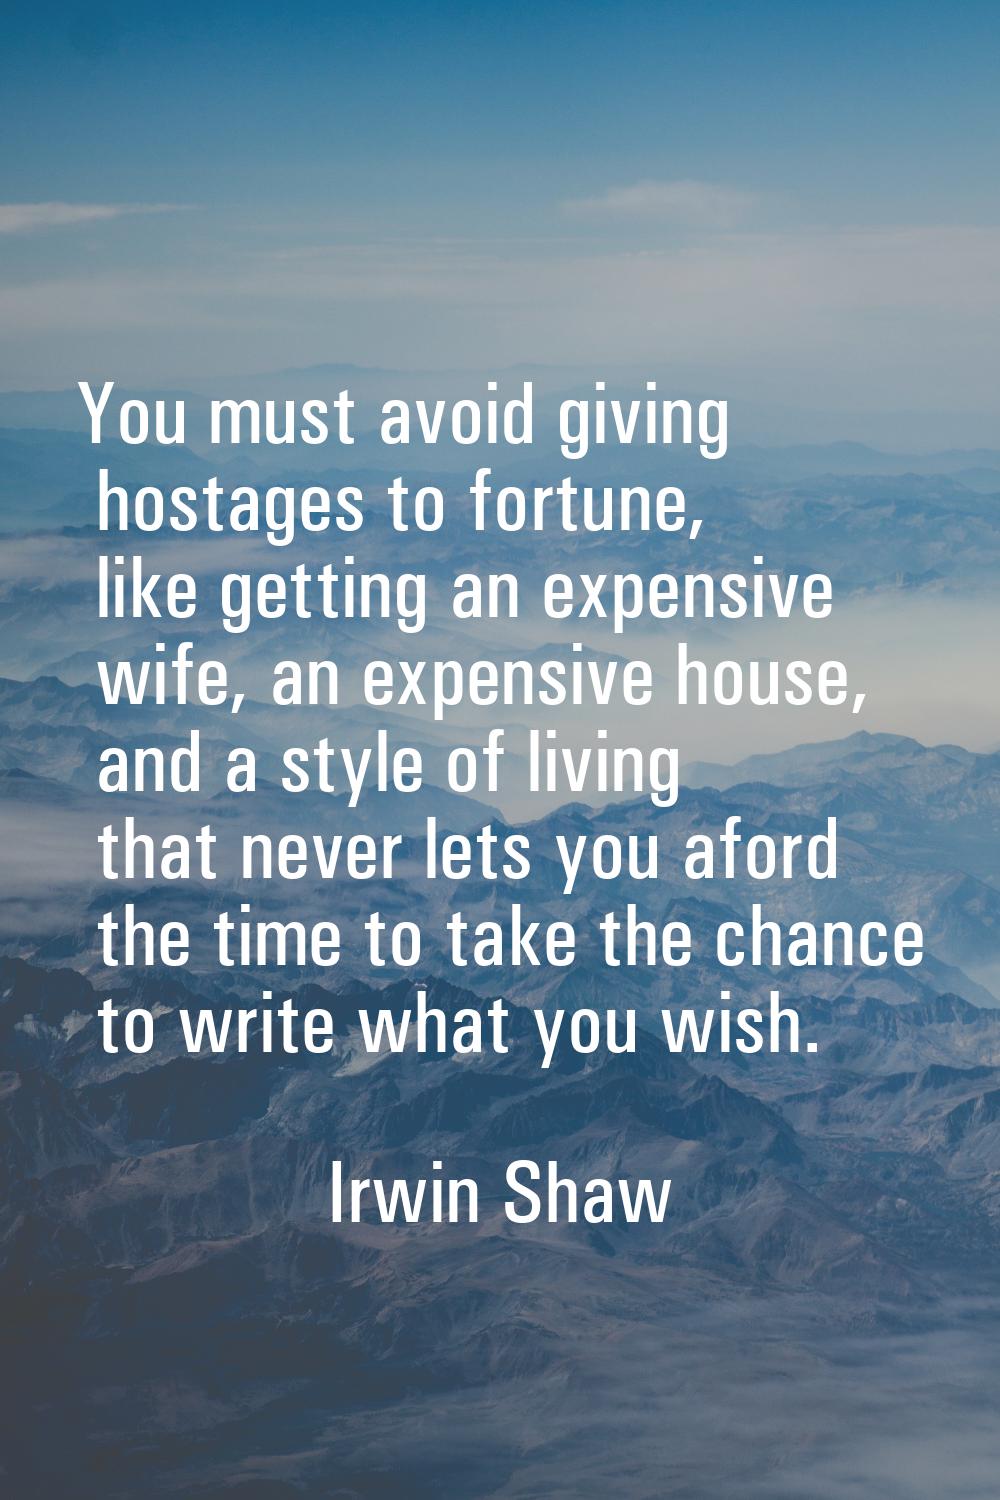 You must avoid giving hostages to fortune, like getting an expensive wife, an expensive house, and 